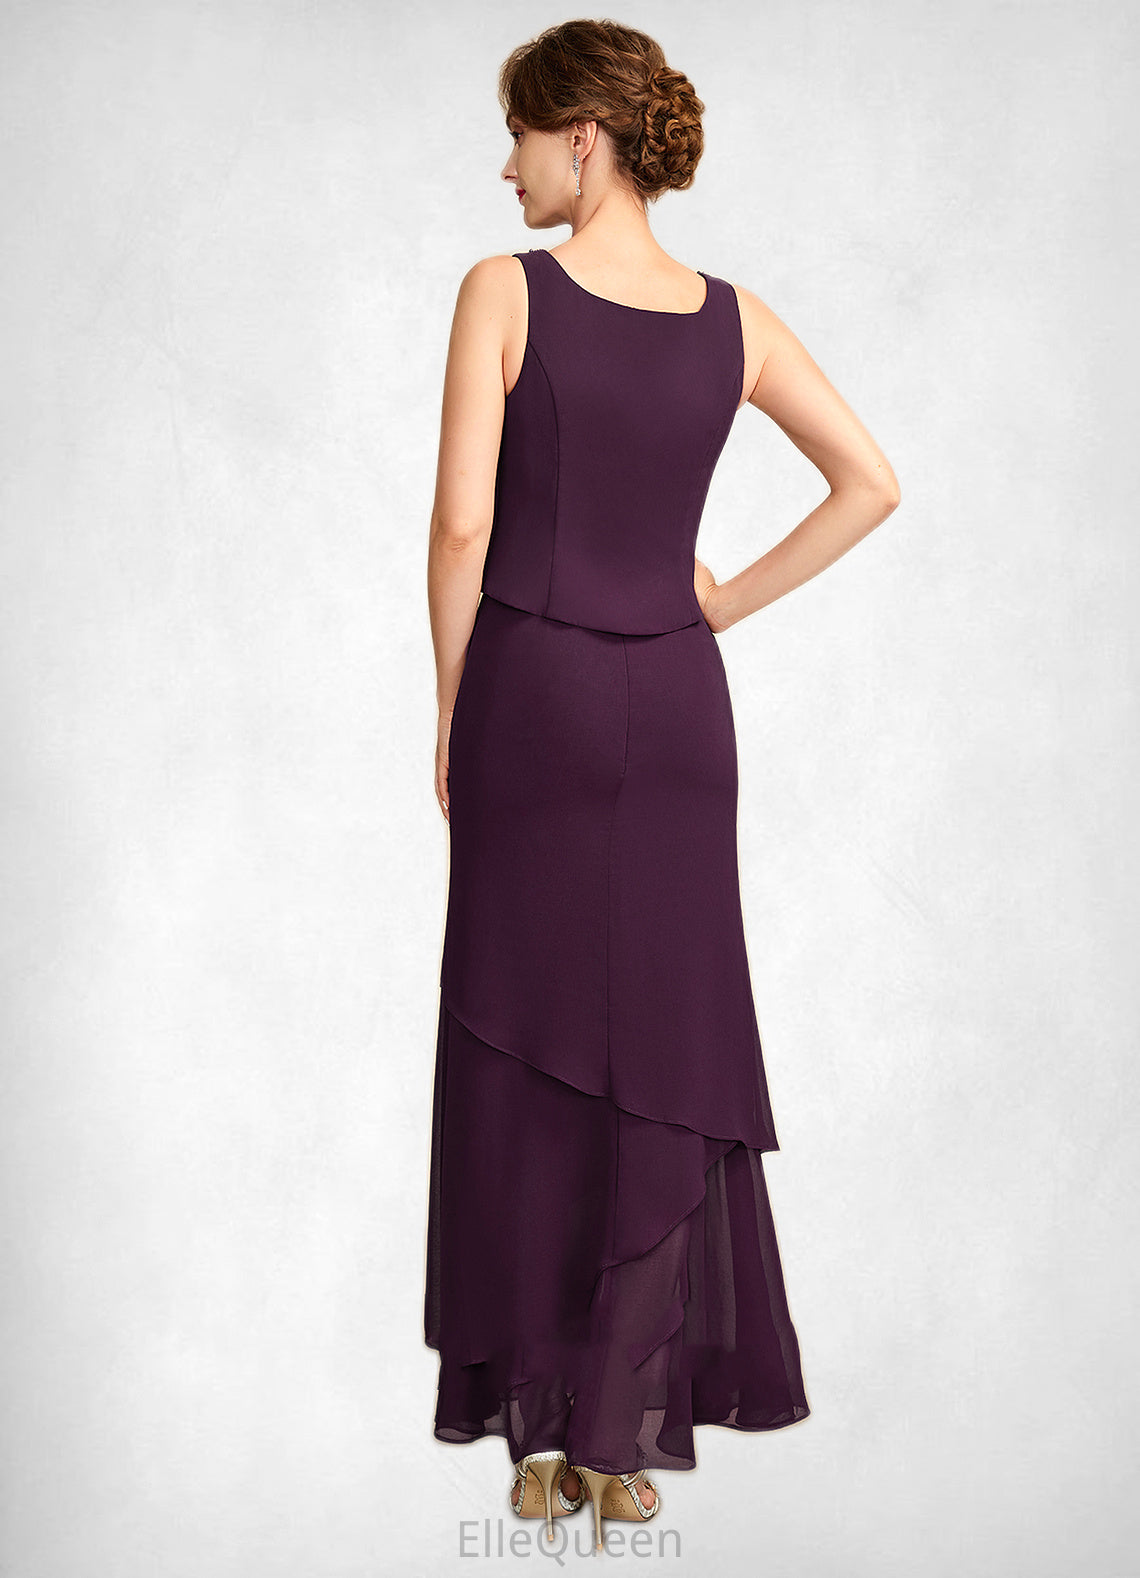 Danica Sheath/Column Scoop Neck Ankle-Length Chiffon Mother of the Bride Dress With Beading Sequins DG126P0015024